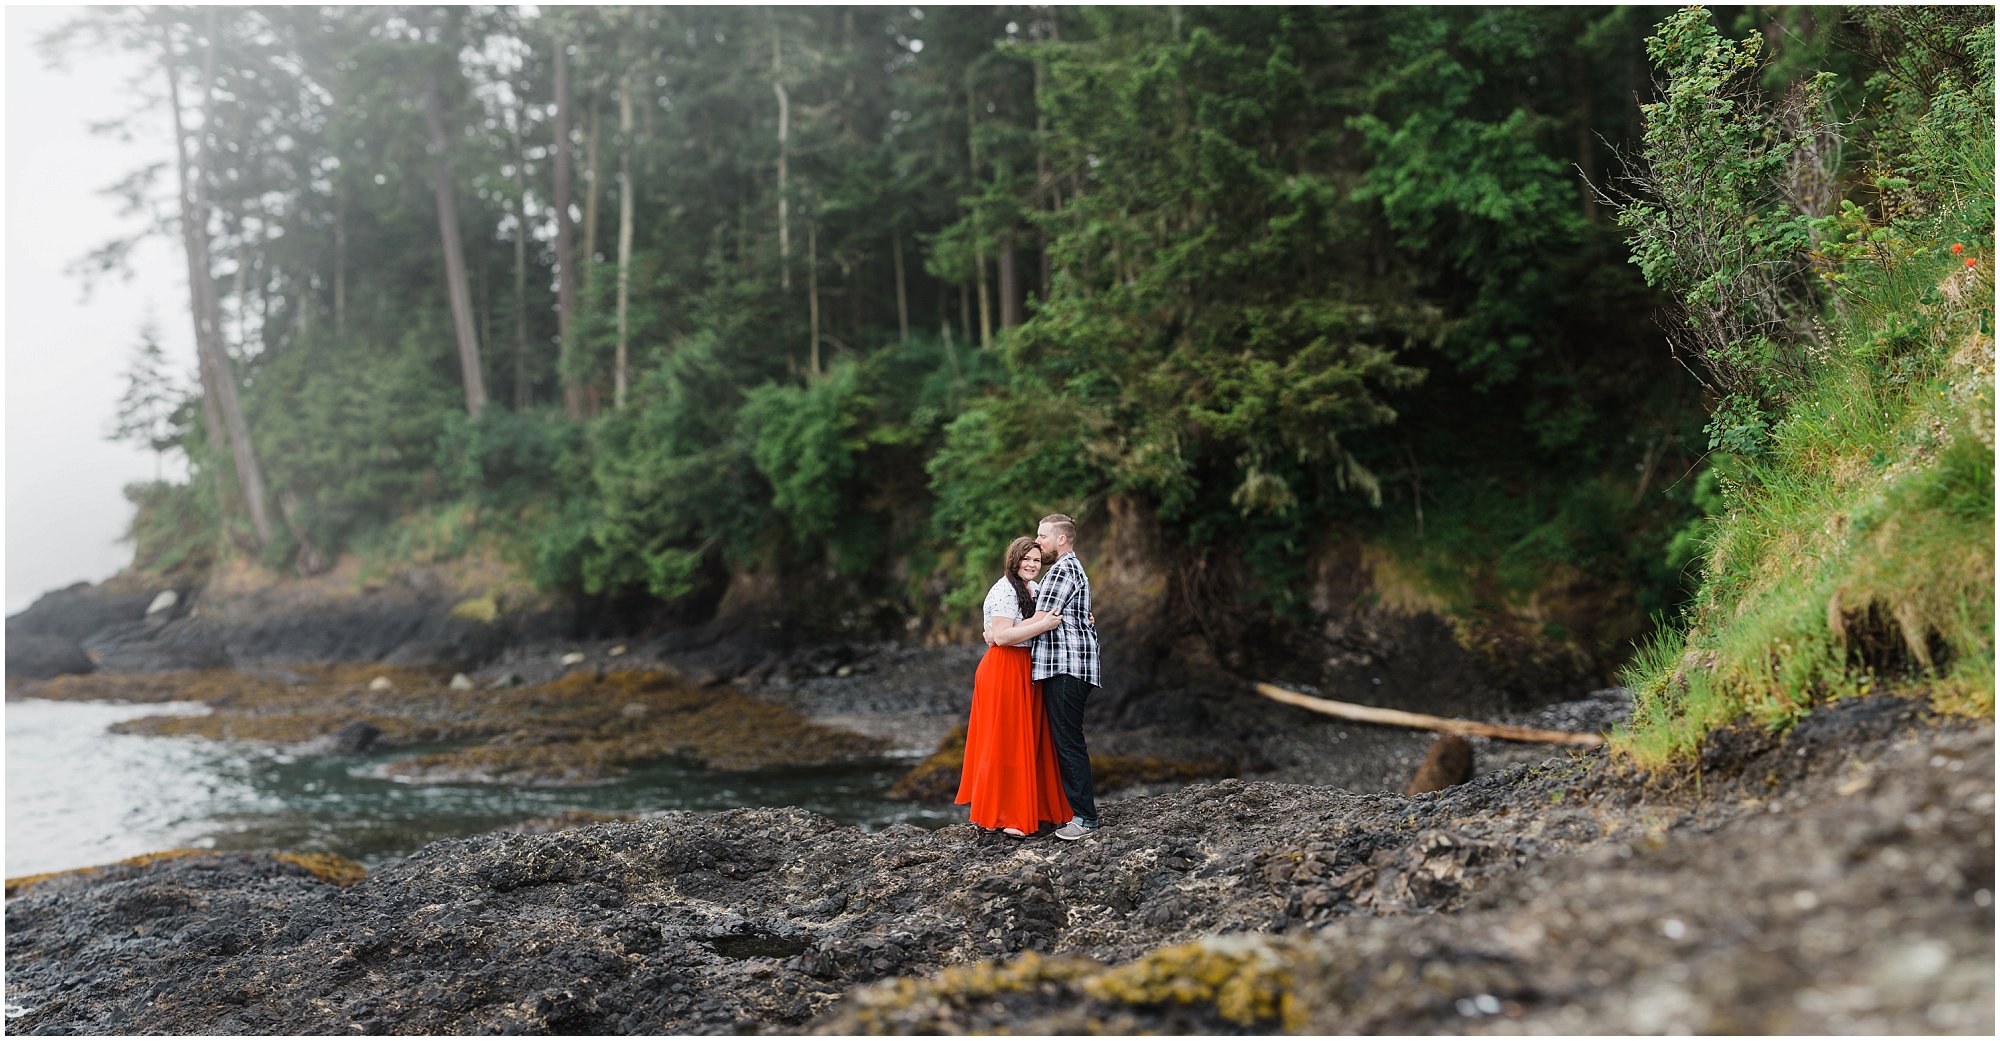 A remarkable Brenizer composite image from a gorgeous, foggy WA Coast adventure session at Salt Creek Recreation Area near Port Angeles, WA by Oregon elopement photographer Erica Swantek Photography. 